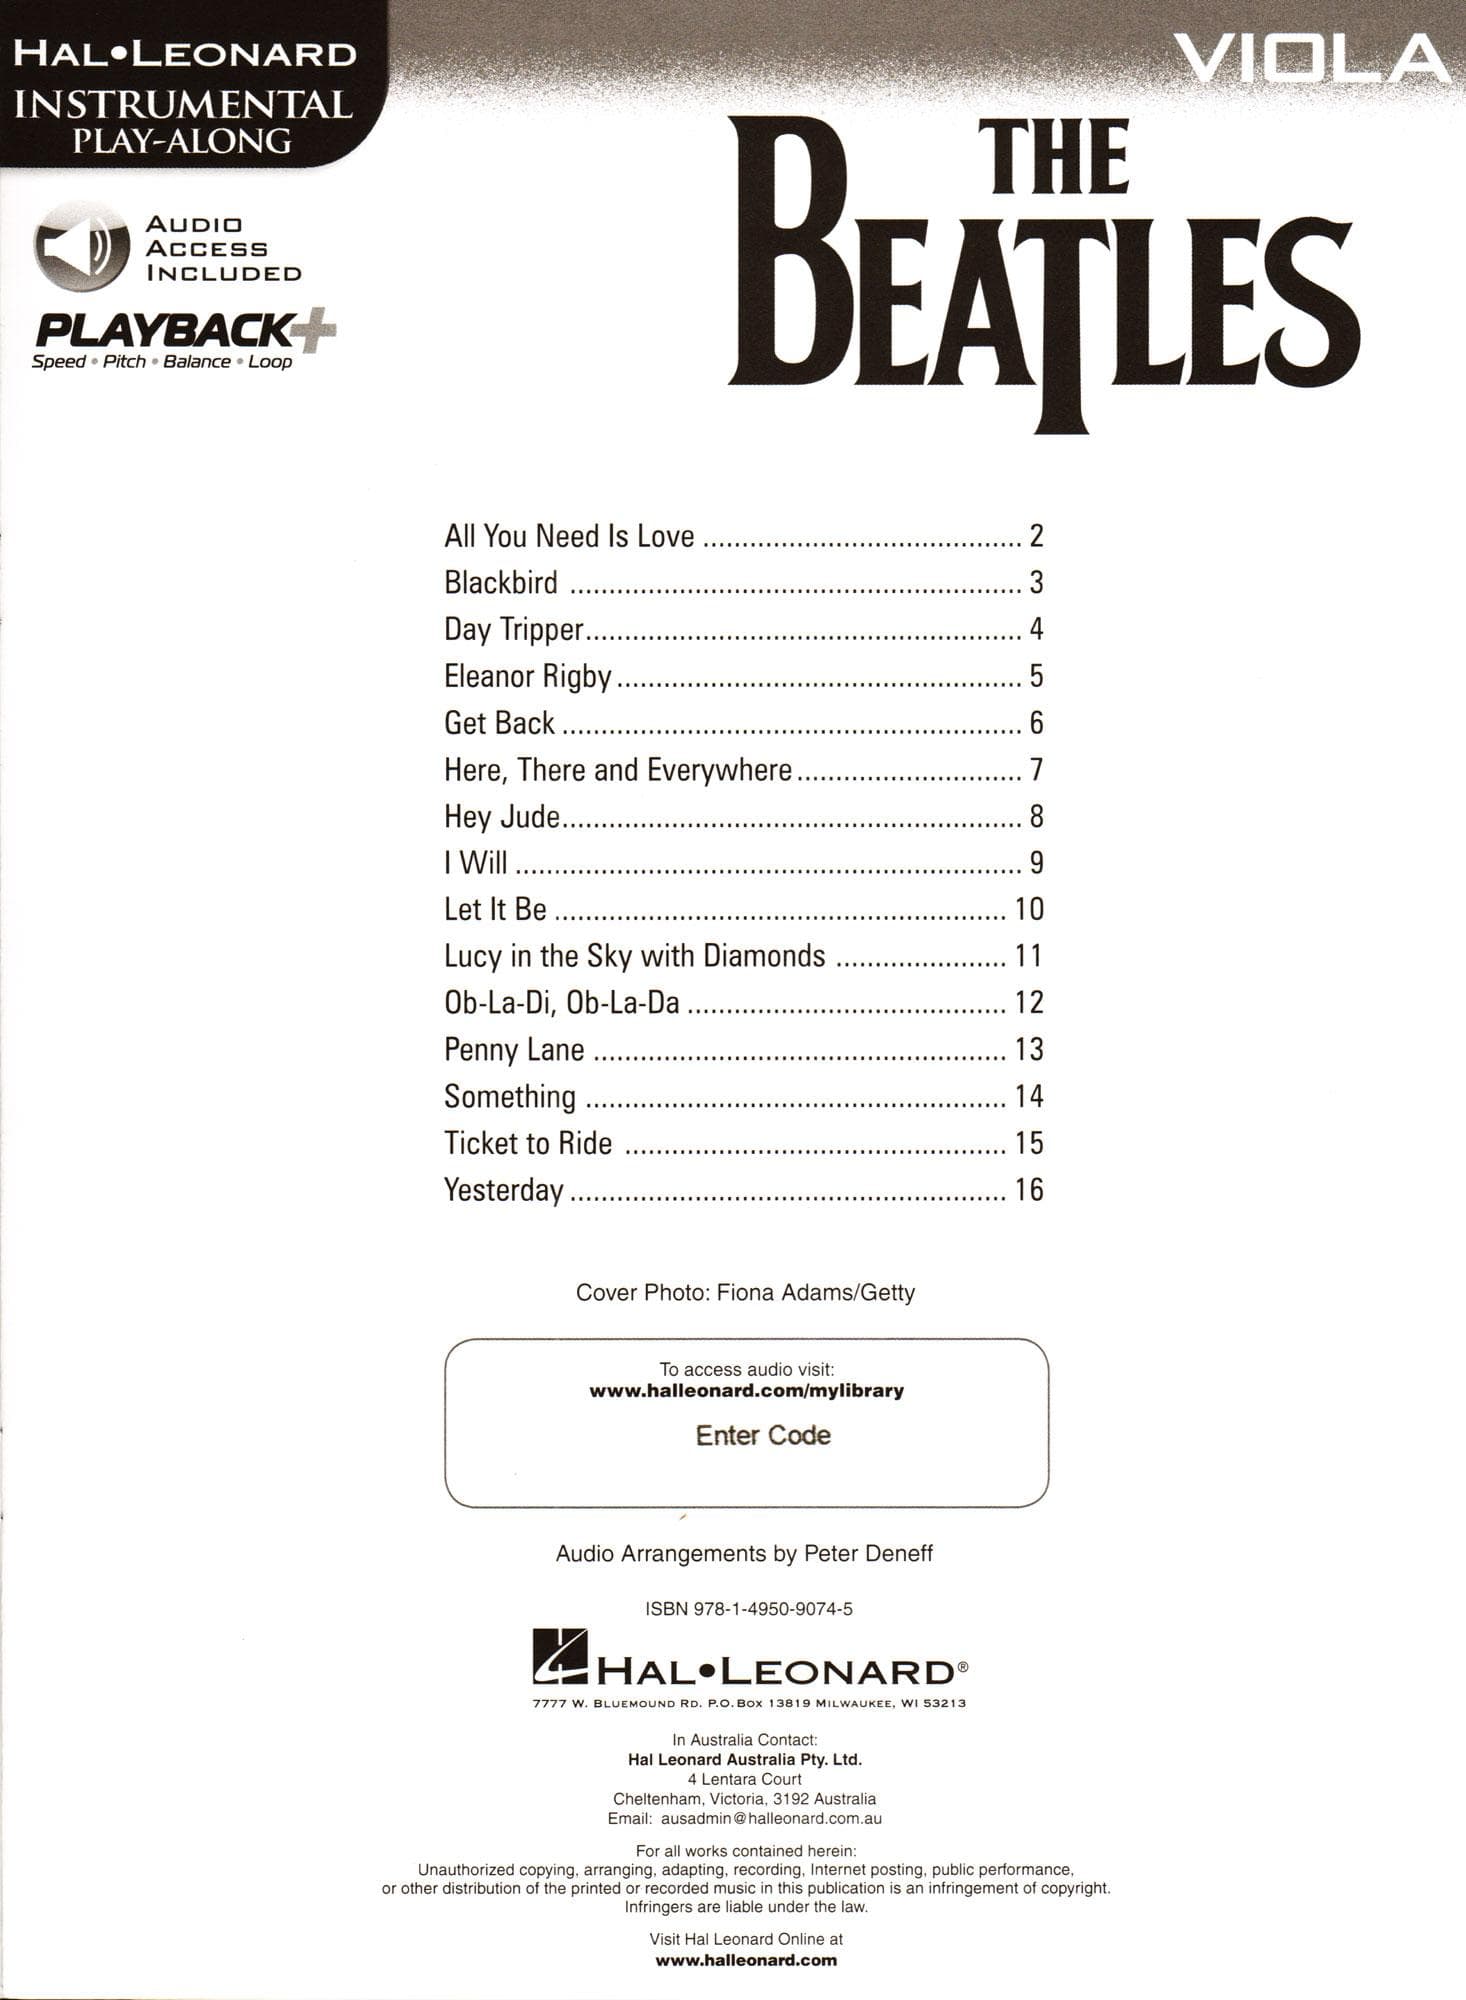 The Beatles - Instrumental Play-Along - 15 Songs - for Viola with Online Audio - Hal Leonard